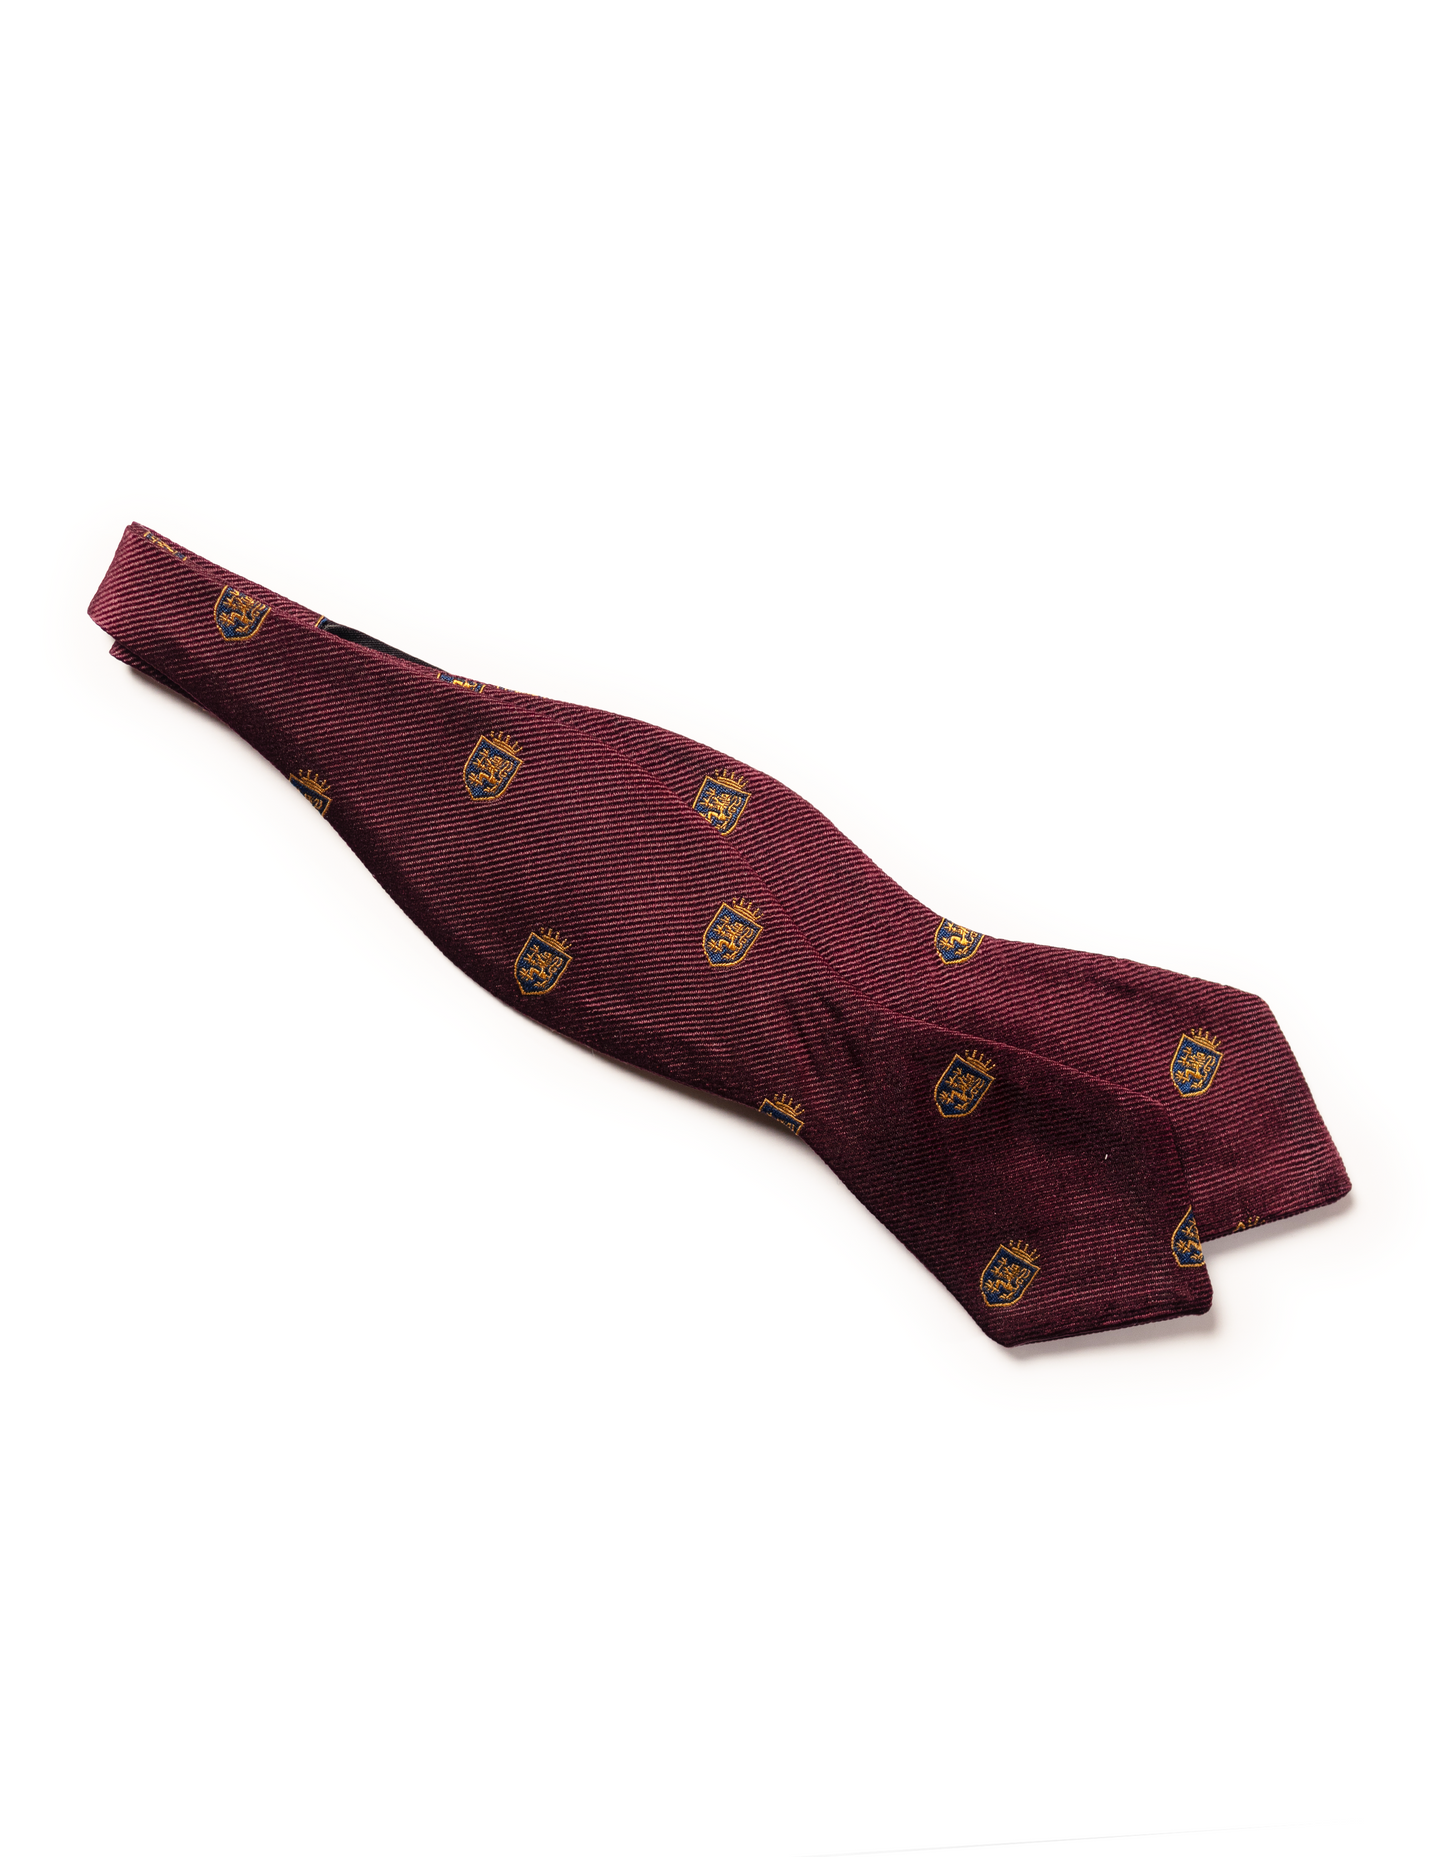 EMBLEMATIC CREST BATWING BOW TIE  - BURGUNDY